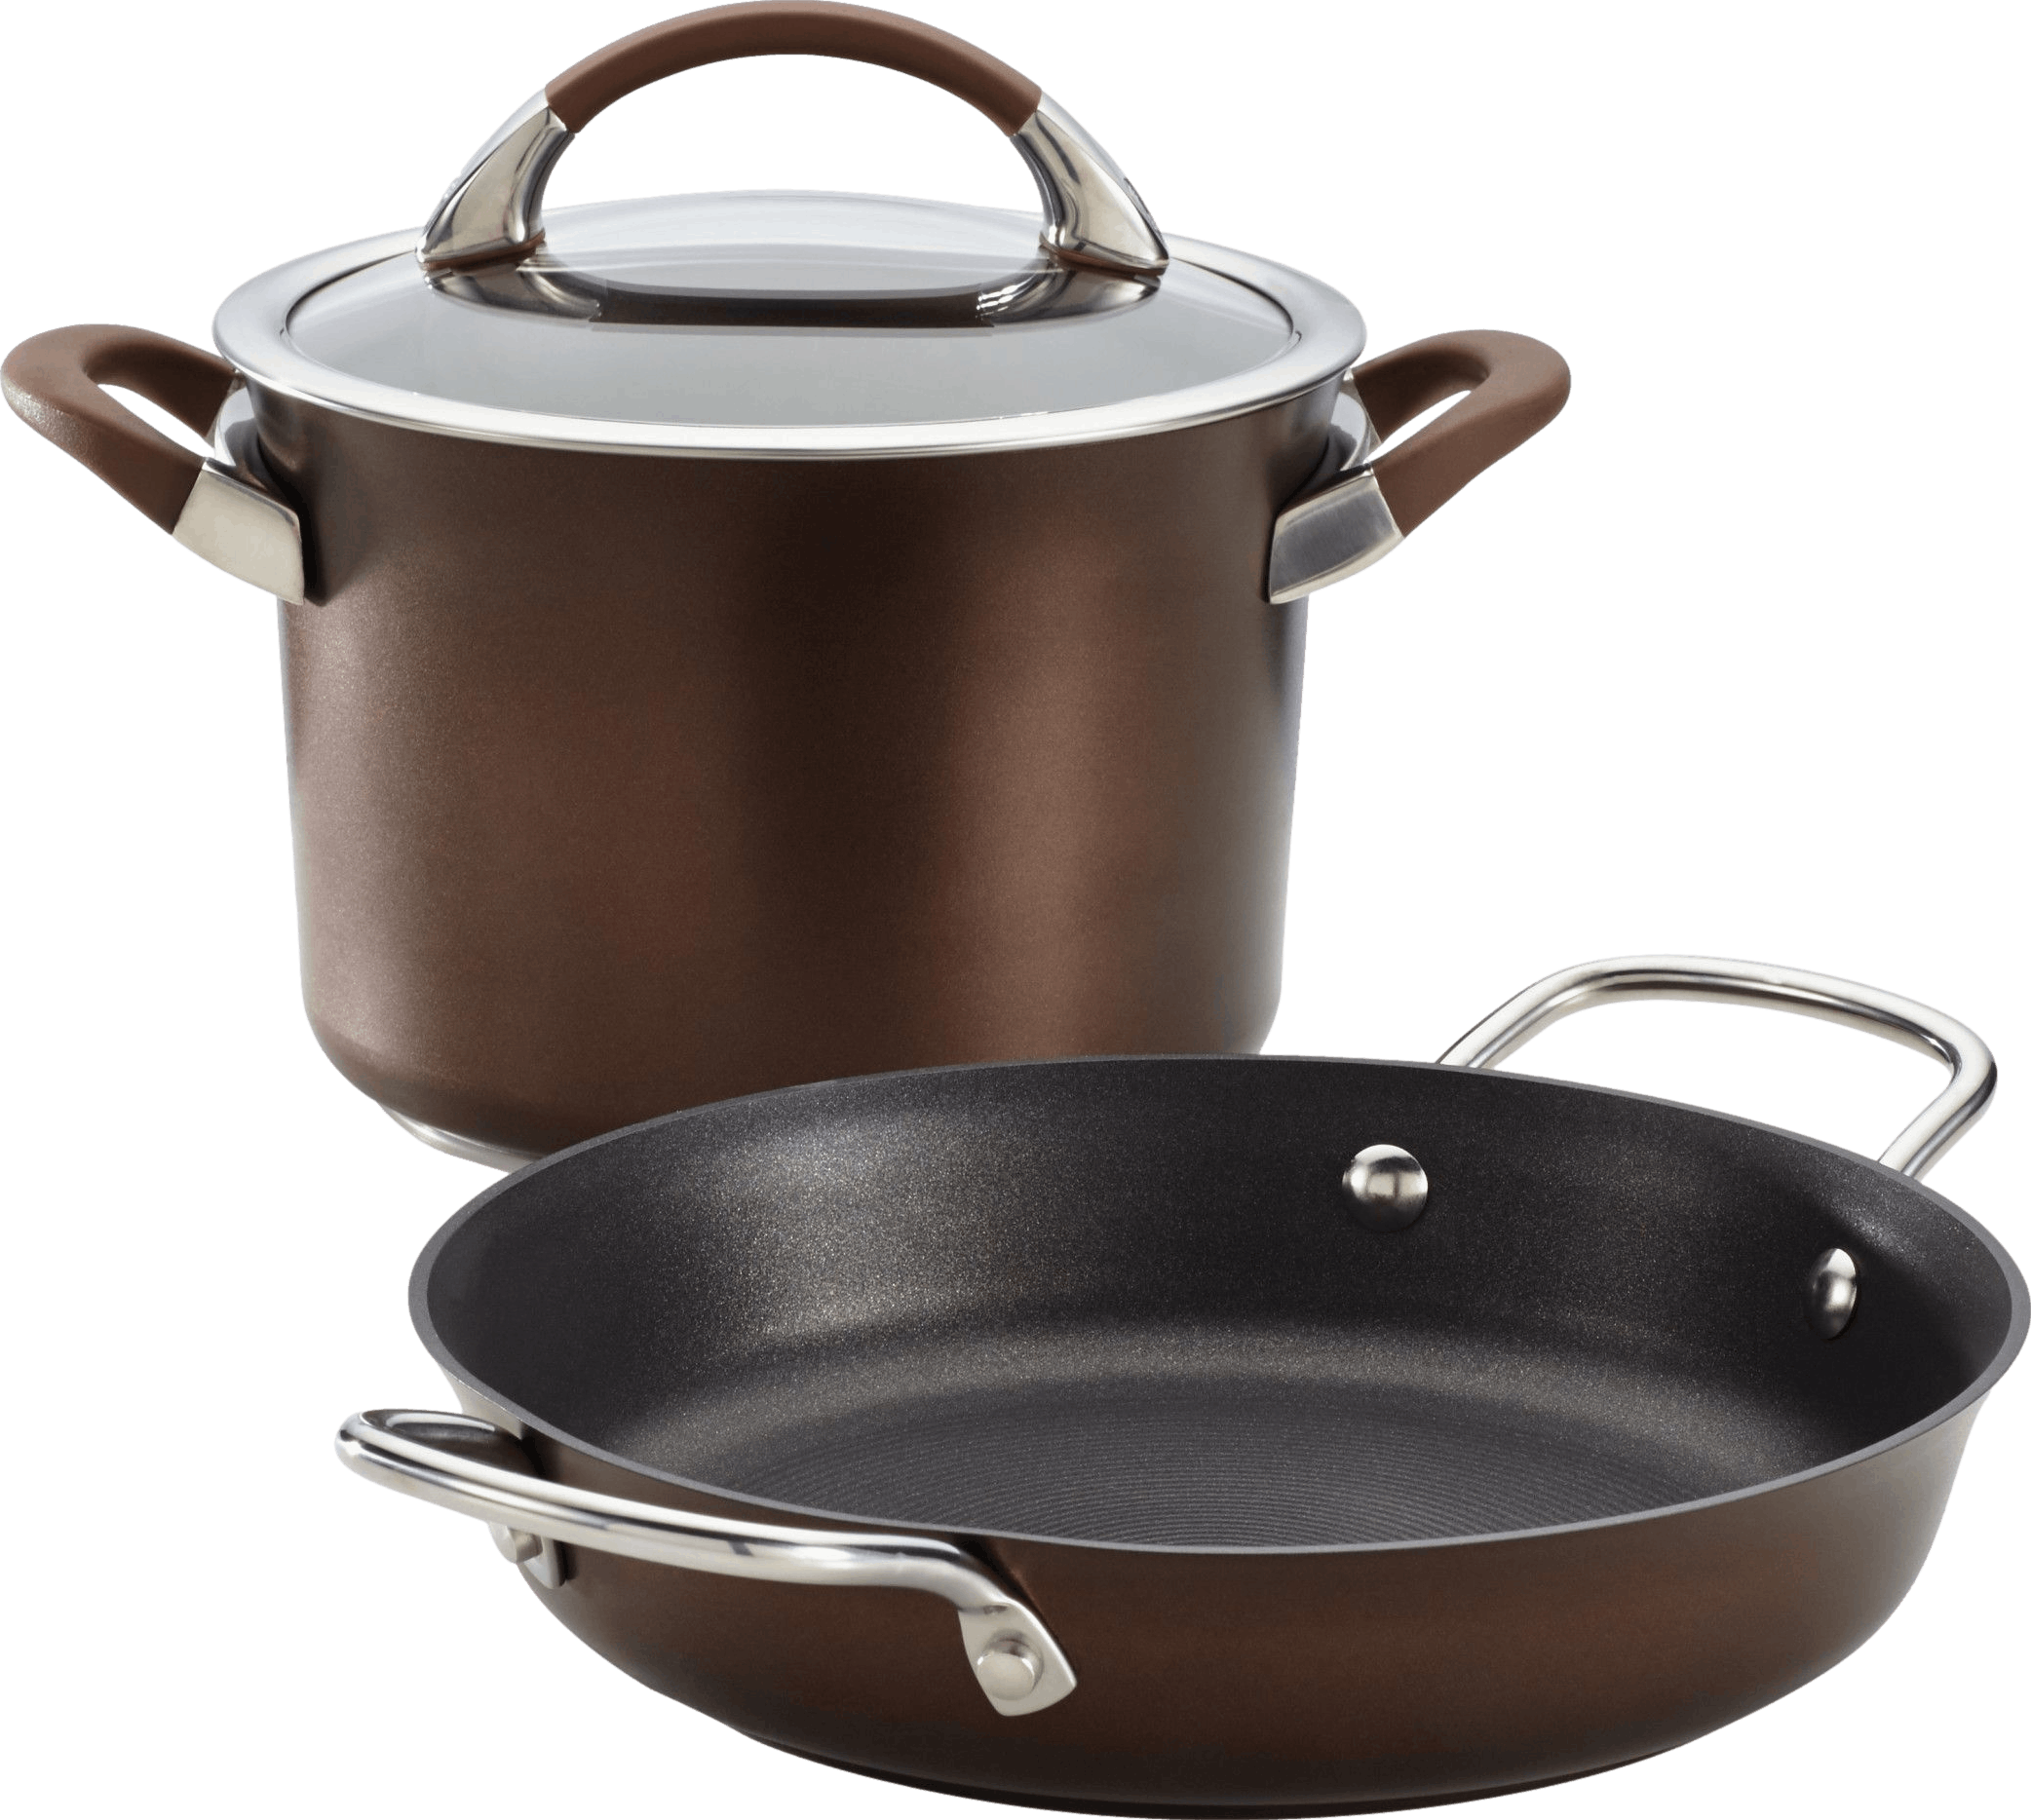 Circulon Symmetry Hard-Anodized Nonstick Cookware Induction Pots and Pans Set, 3-Piece, Chocolate